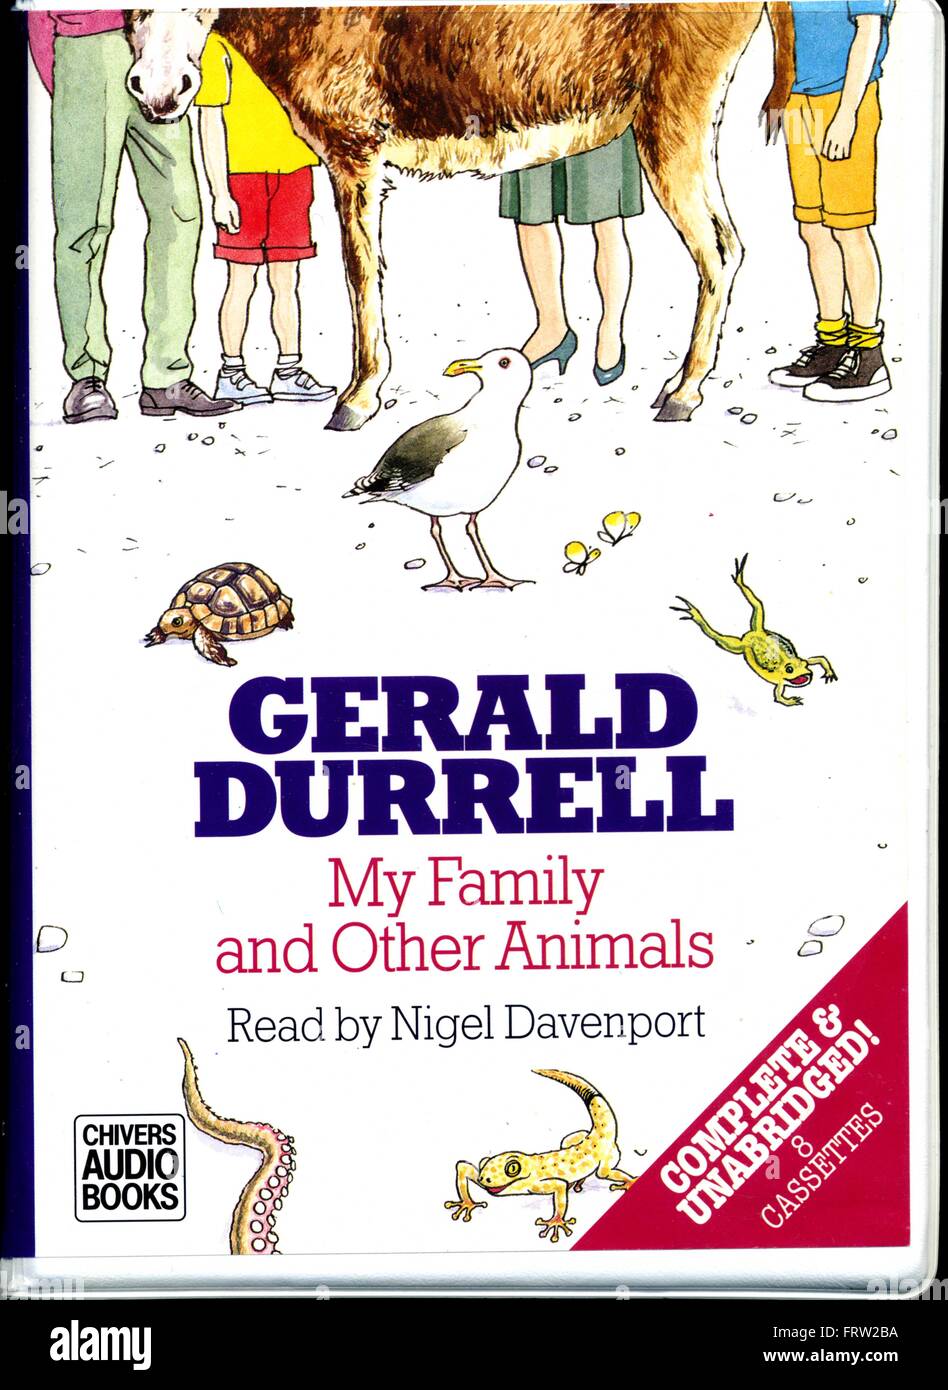 durrell my family and other animals